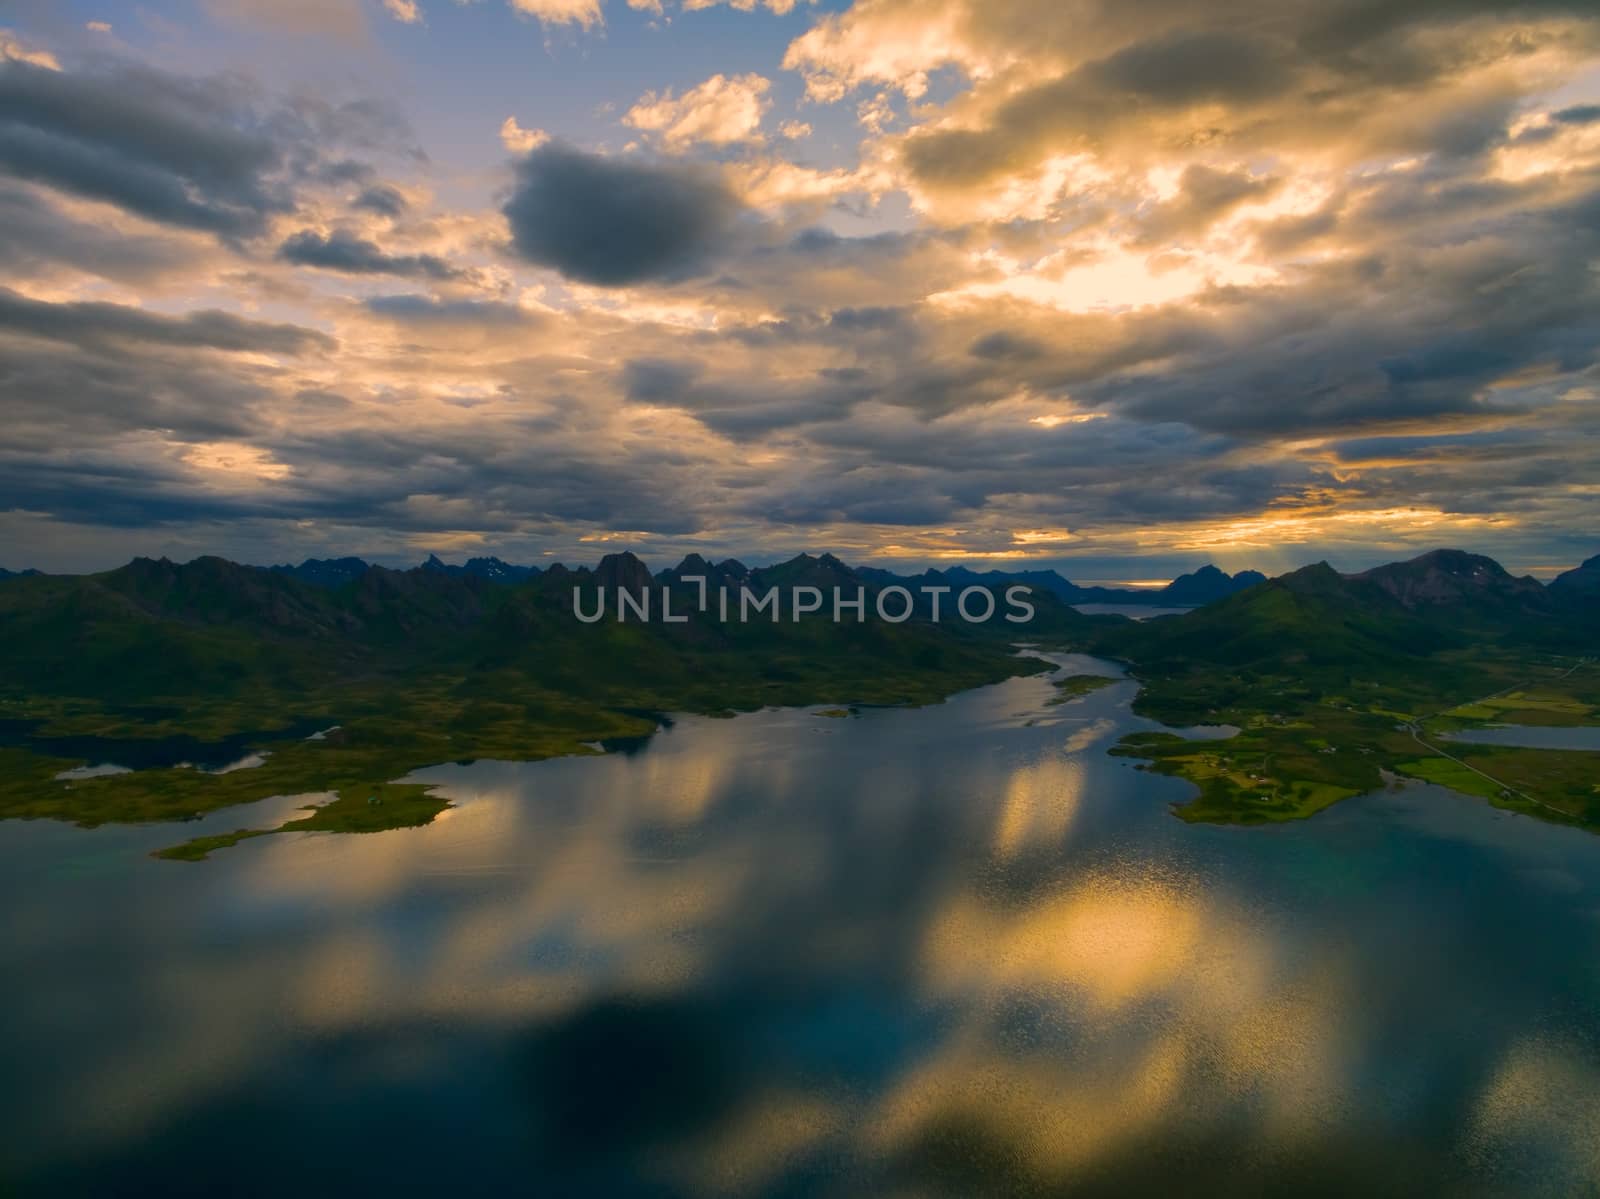 Breathtaking view of reflecting clouds on Vesteralen islands with their dramatic mountain peaks